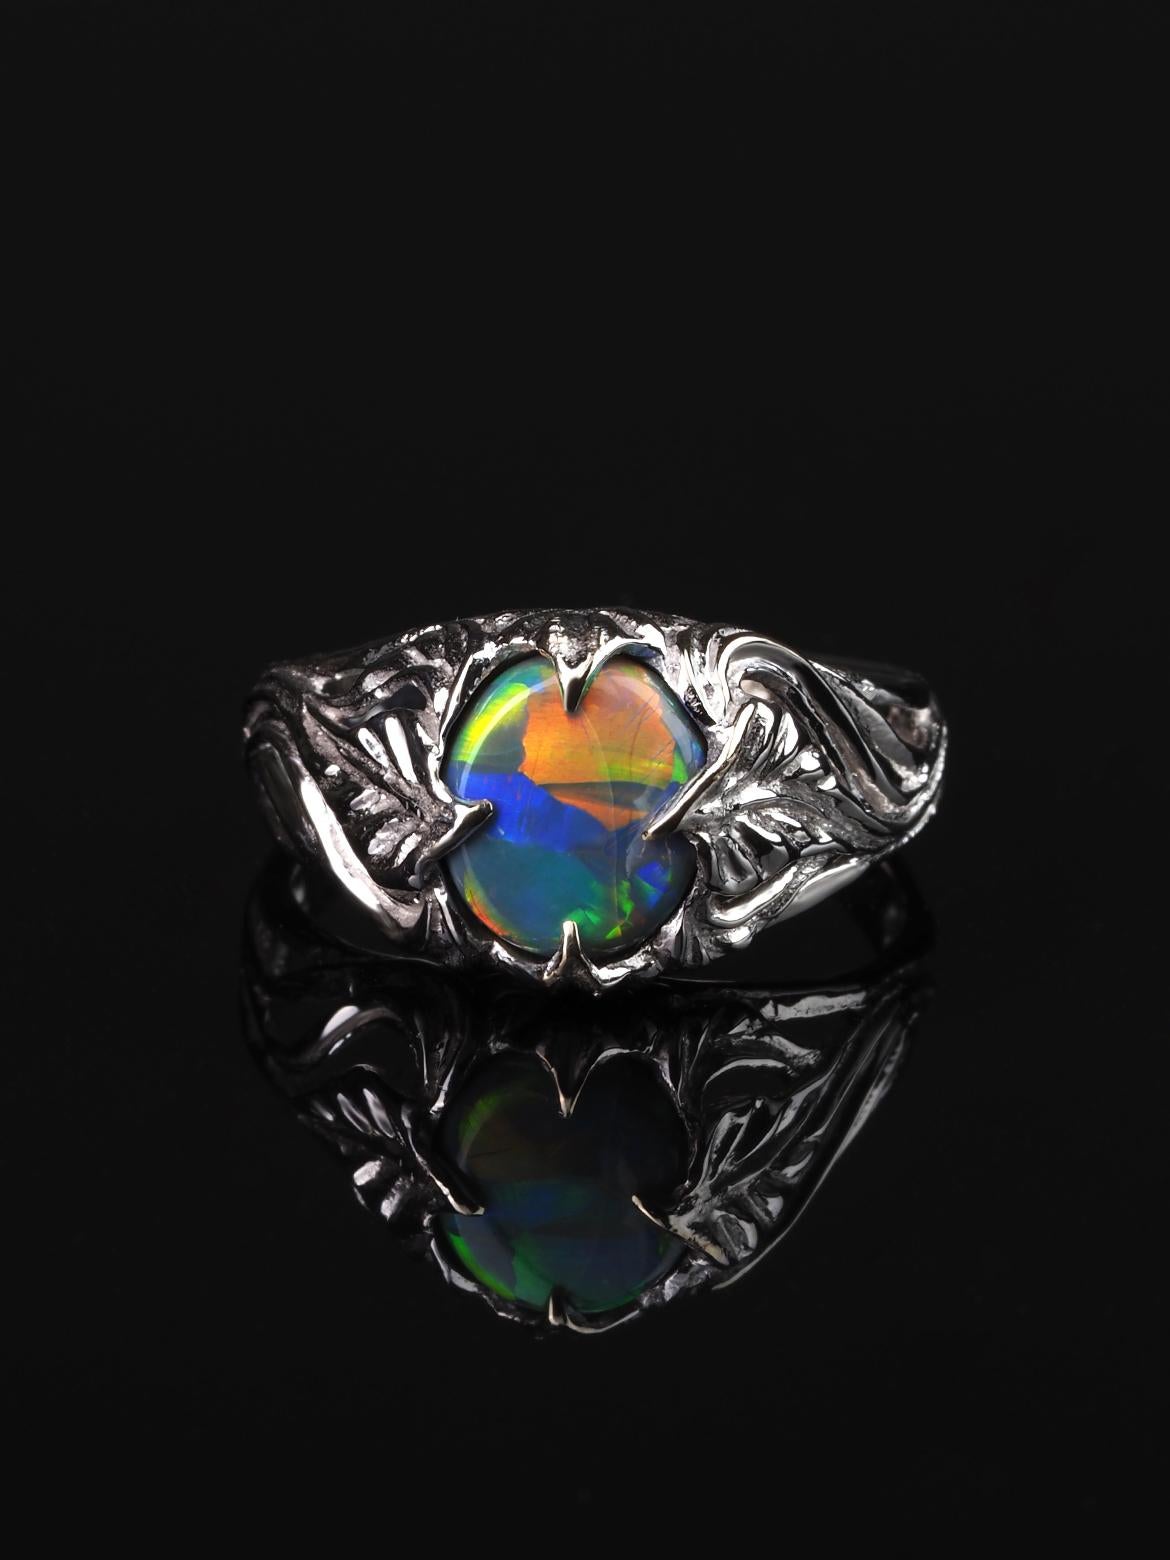 14K white gold ring with natural Dark Opal with bright opalescence 
opal origin - Australia
opal weight - 1.55 carats
stone measurements - 0.28 х 0.35 in / 7 х 9 mm
ring weight - 3.59 grams
ring size - 7 US


We ship our jewelry worldwide – for our